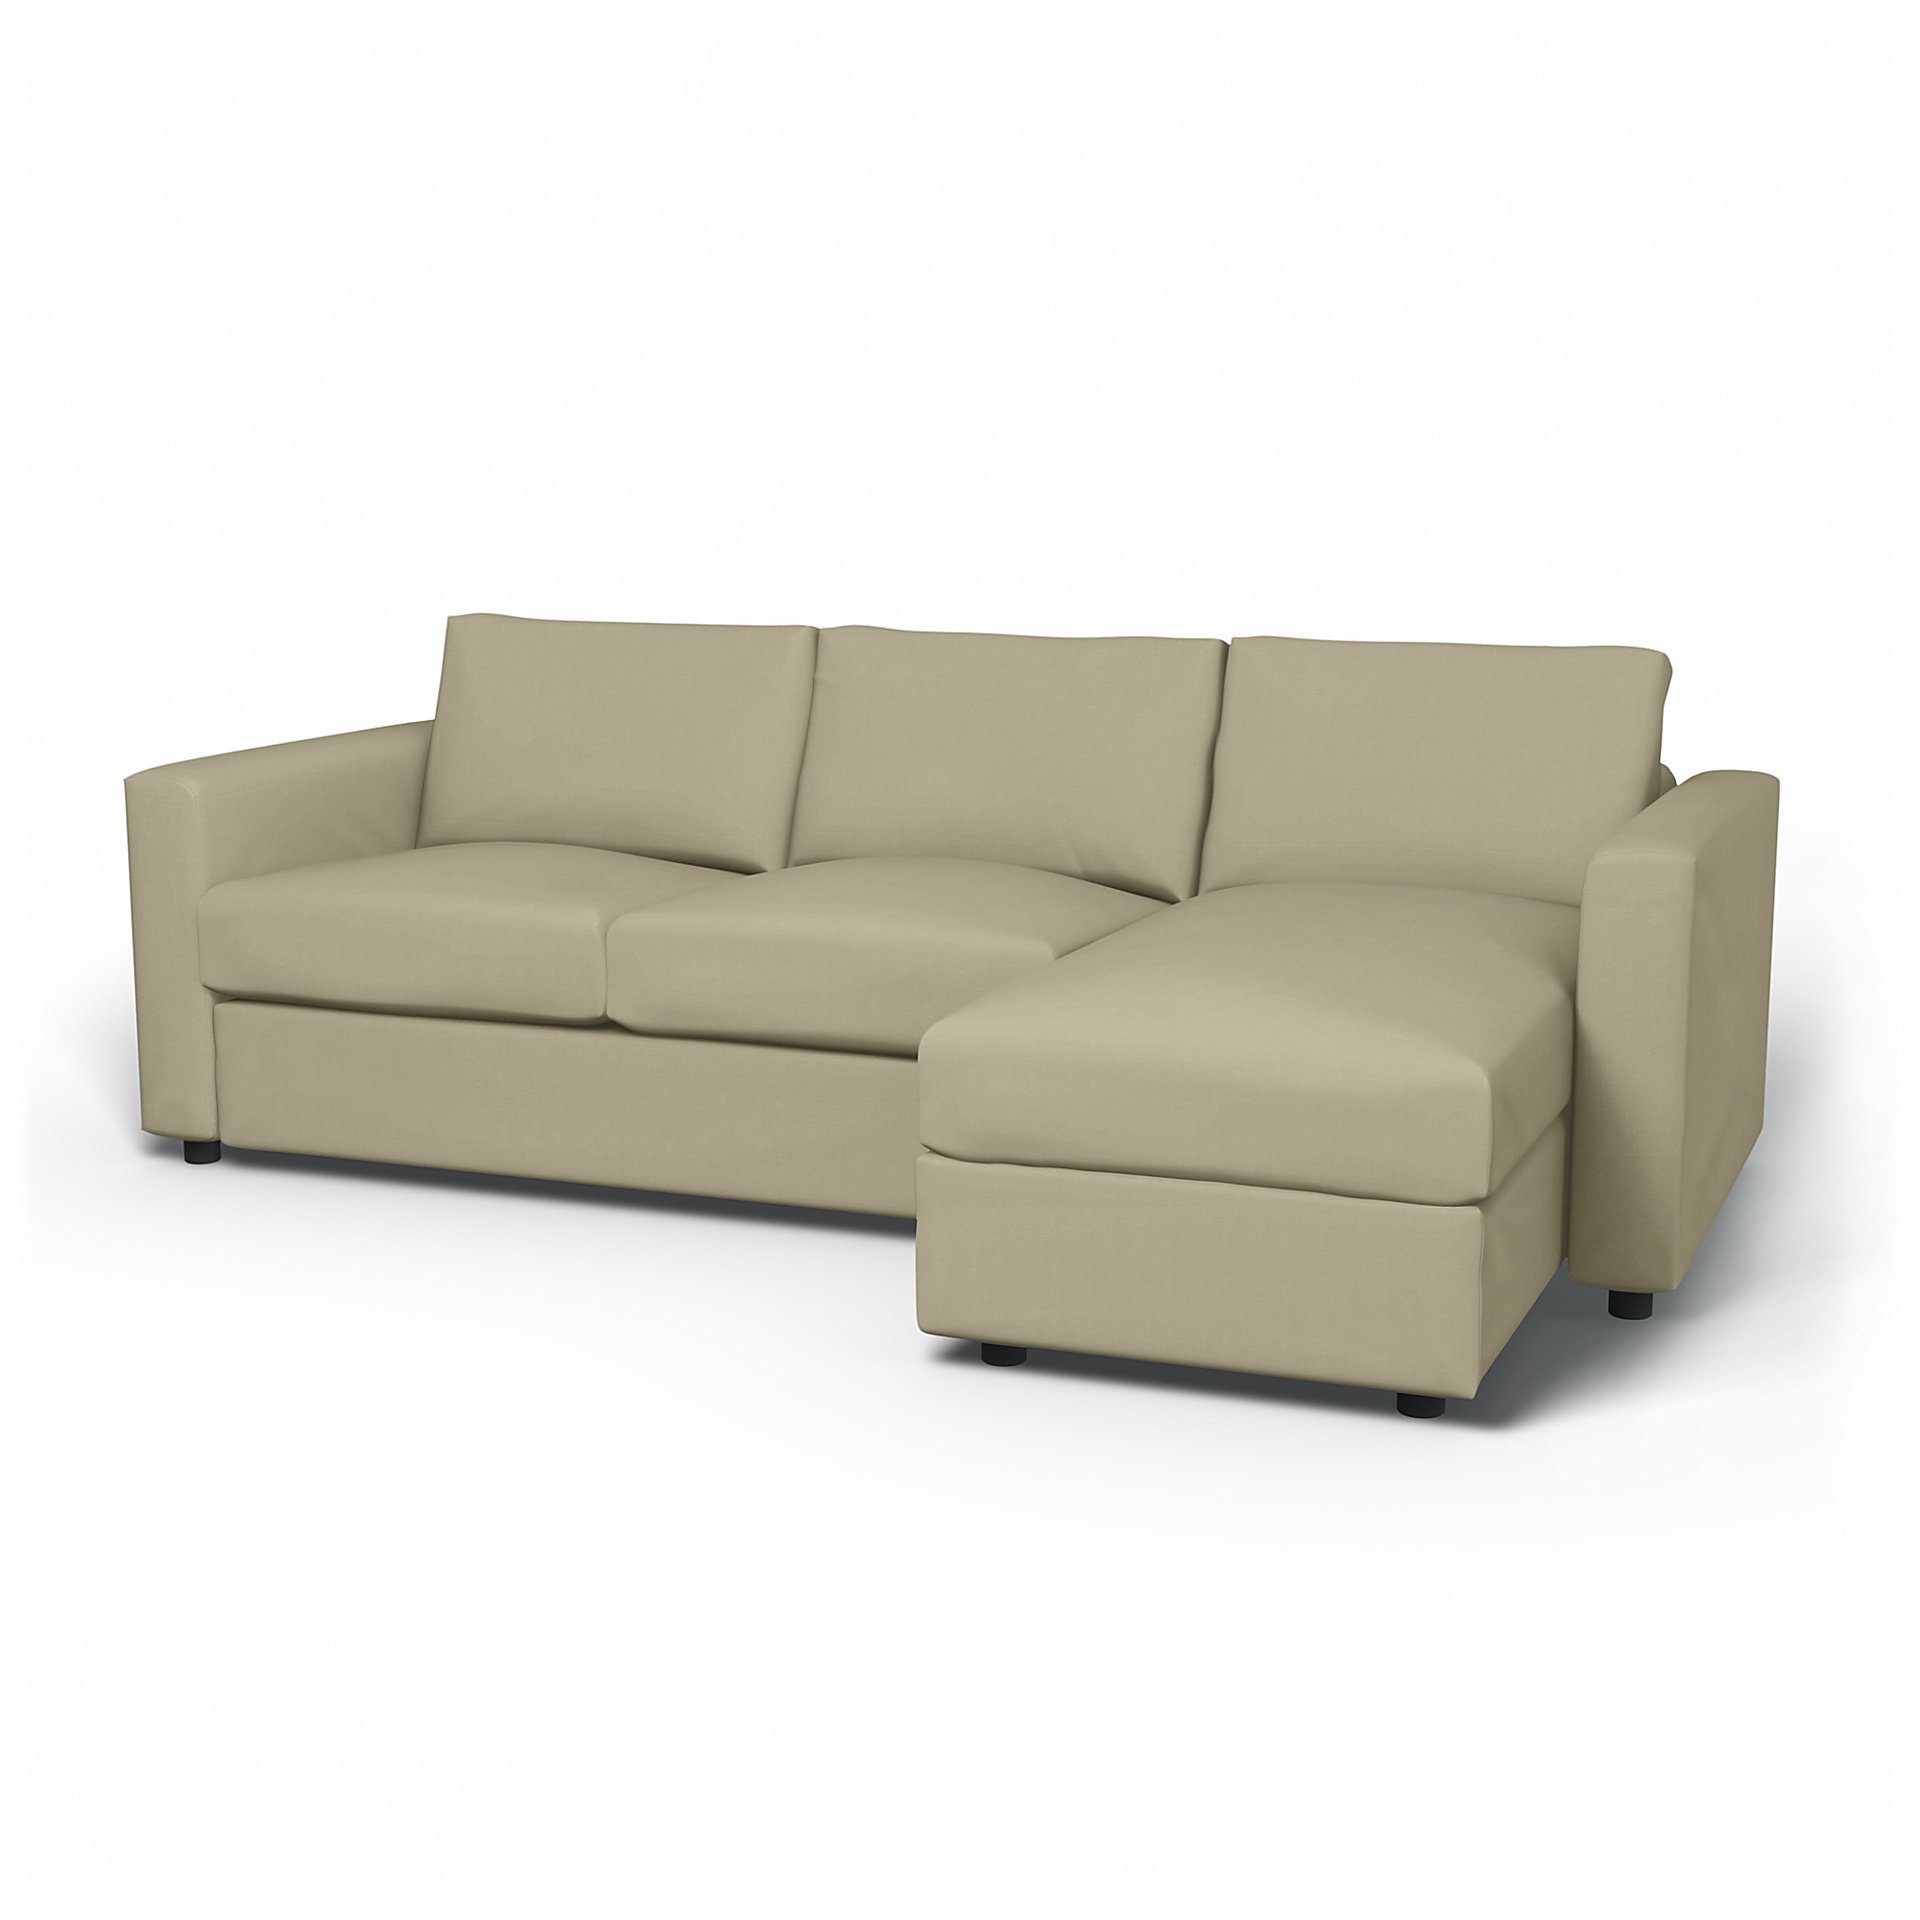 IKEA - Vimle 2 Seater Sofa with Chaise Cover, Sand Beige, Cotton - Bemz